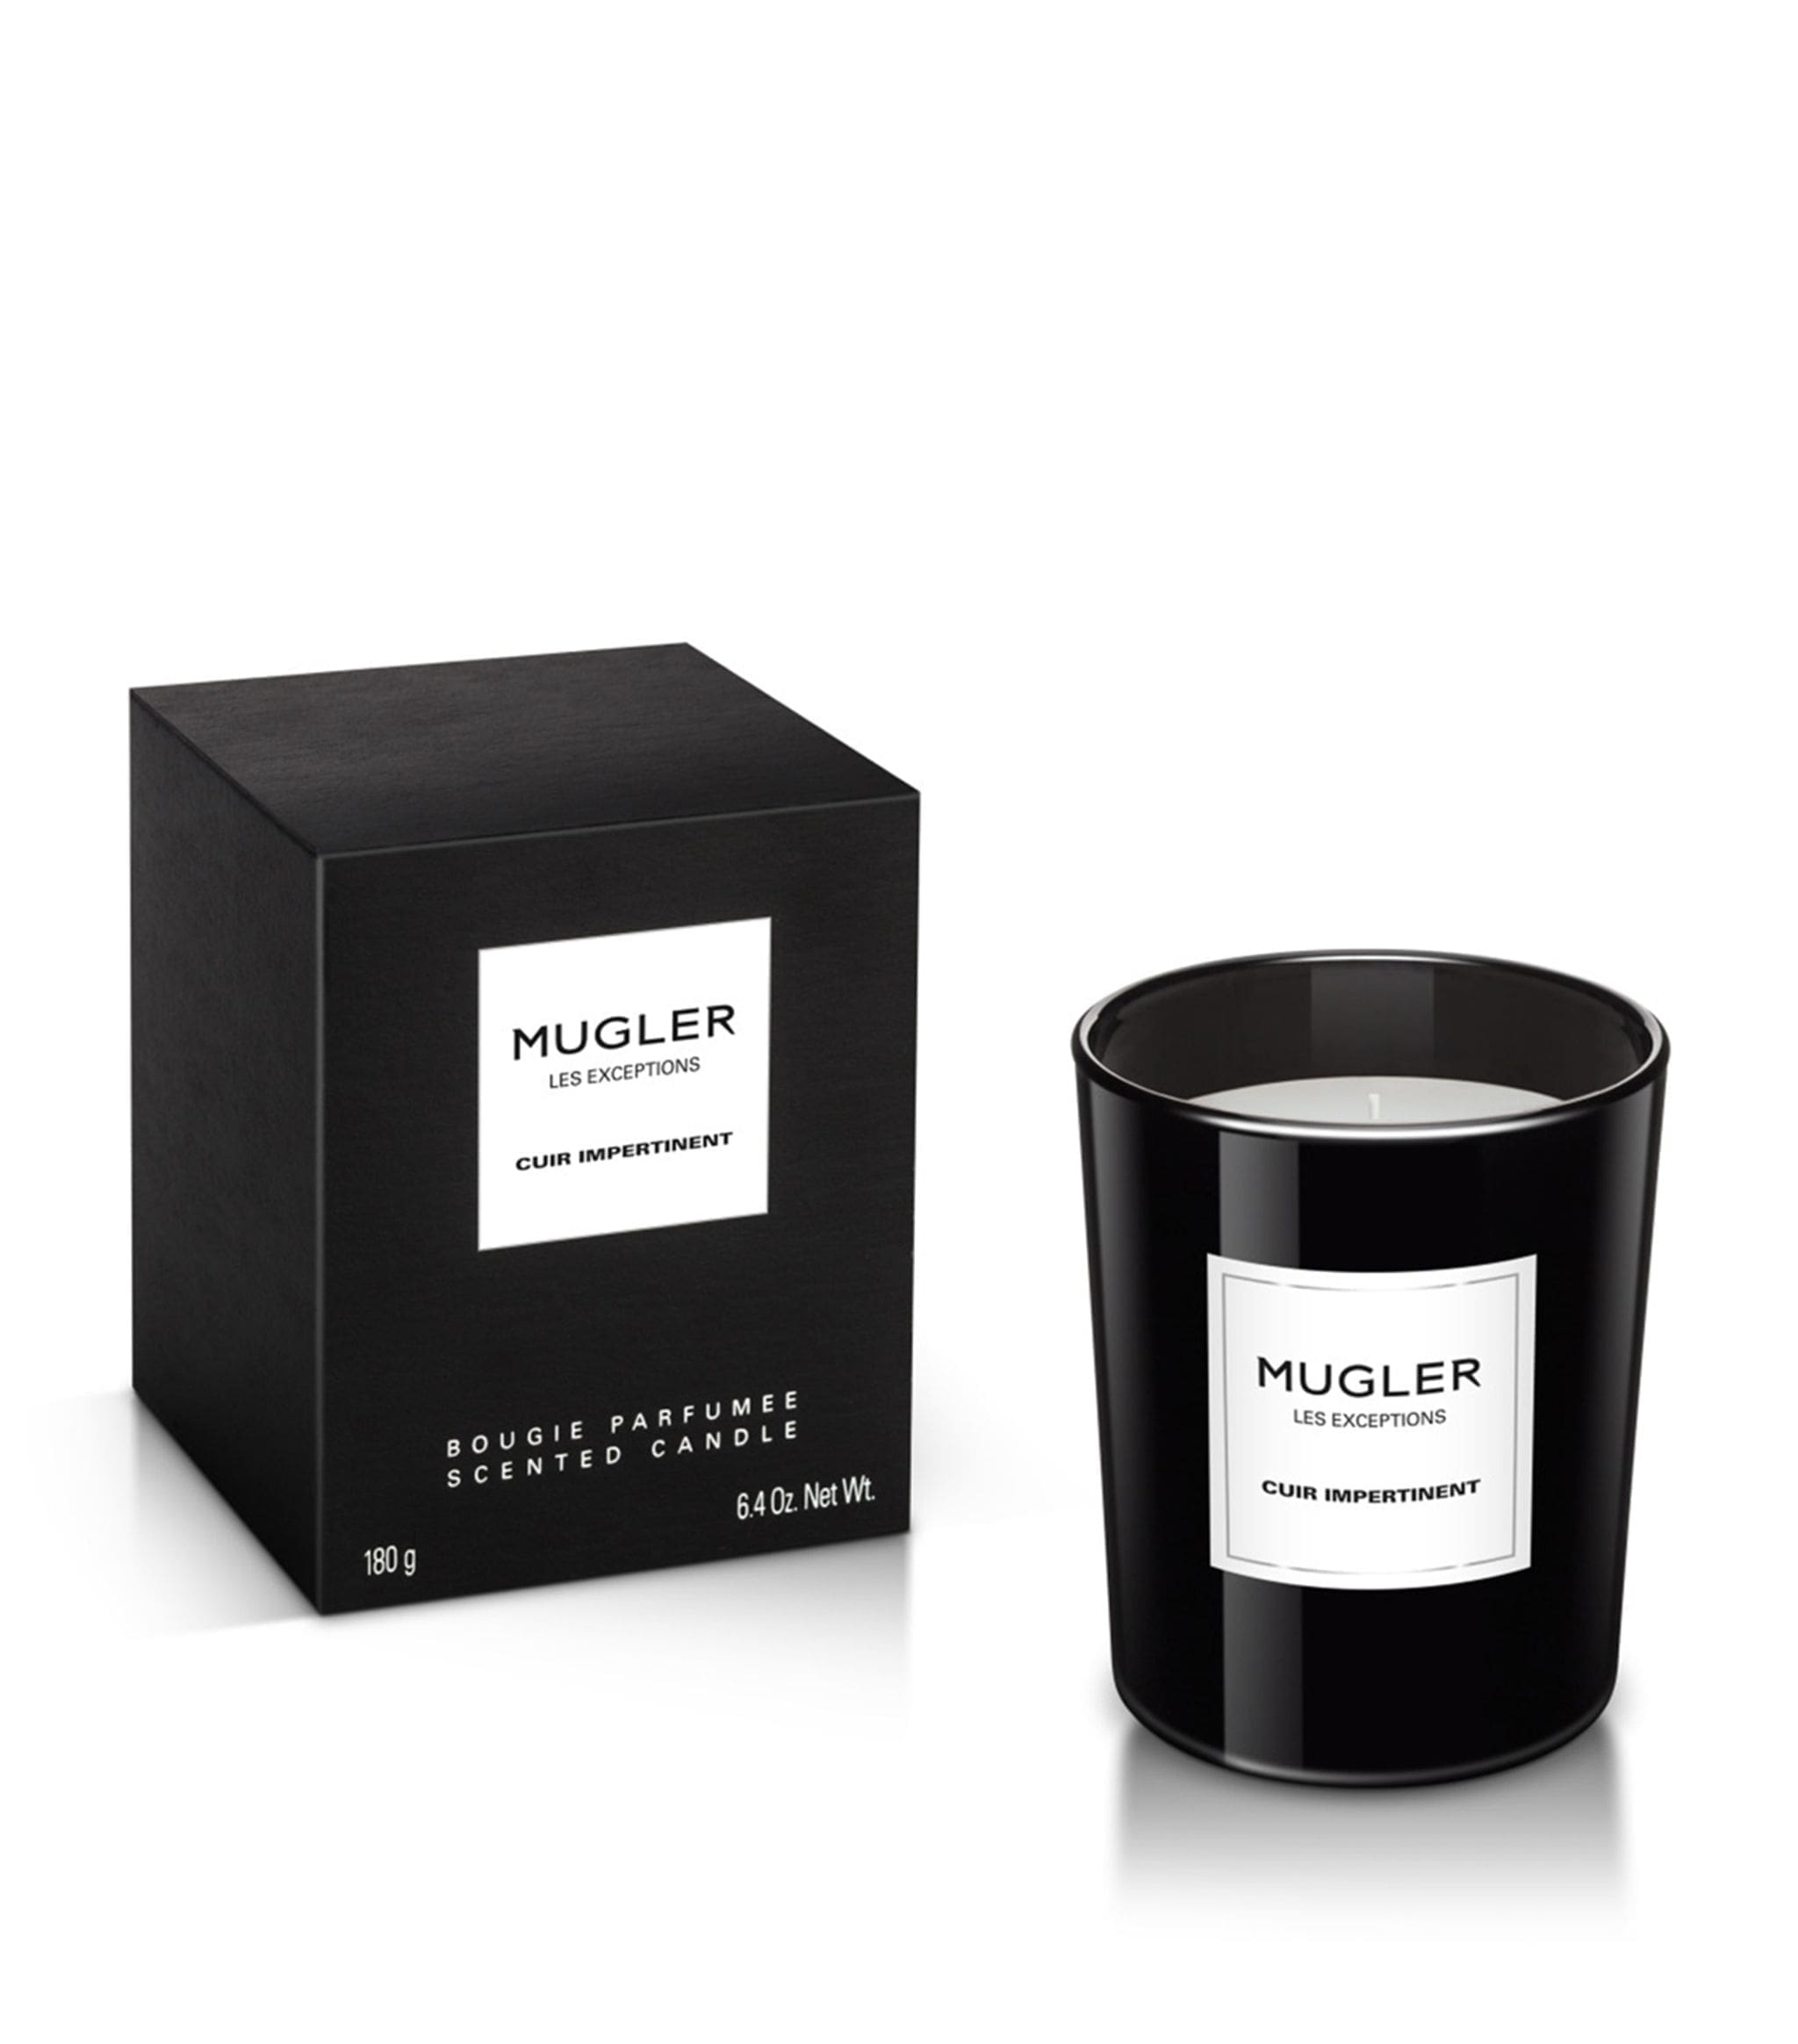 4874 MUGLER Les Exceptions Cuir Impertinent CANDLE 180g